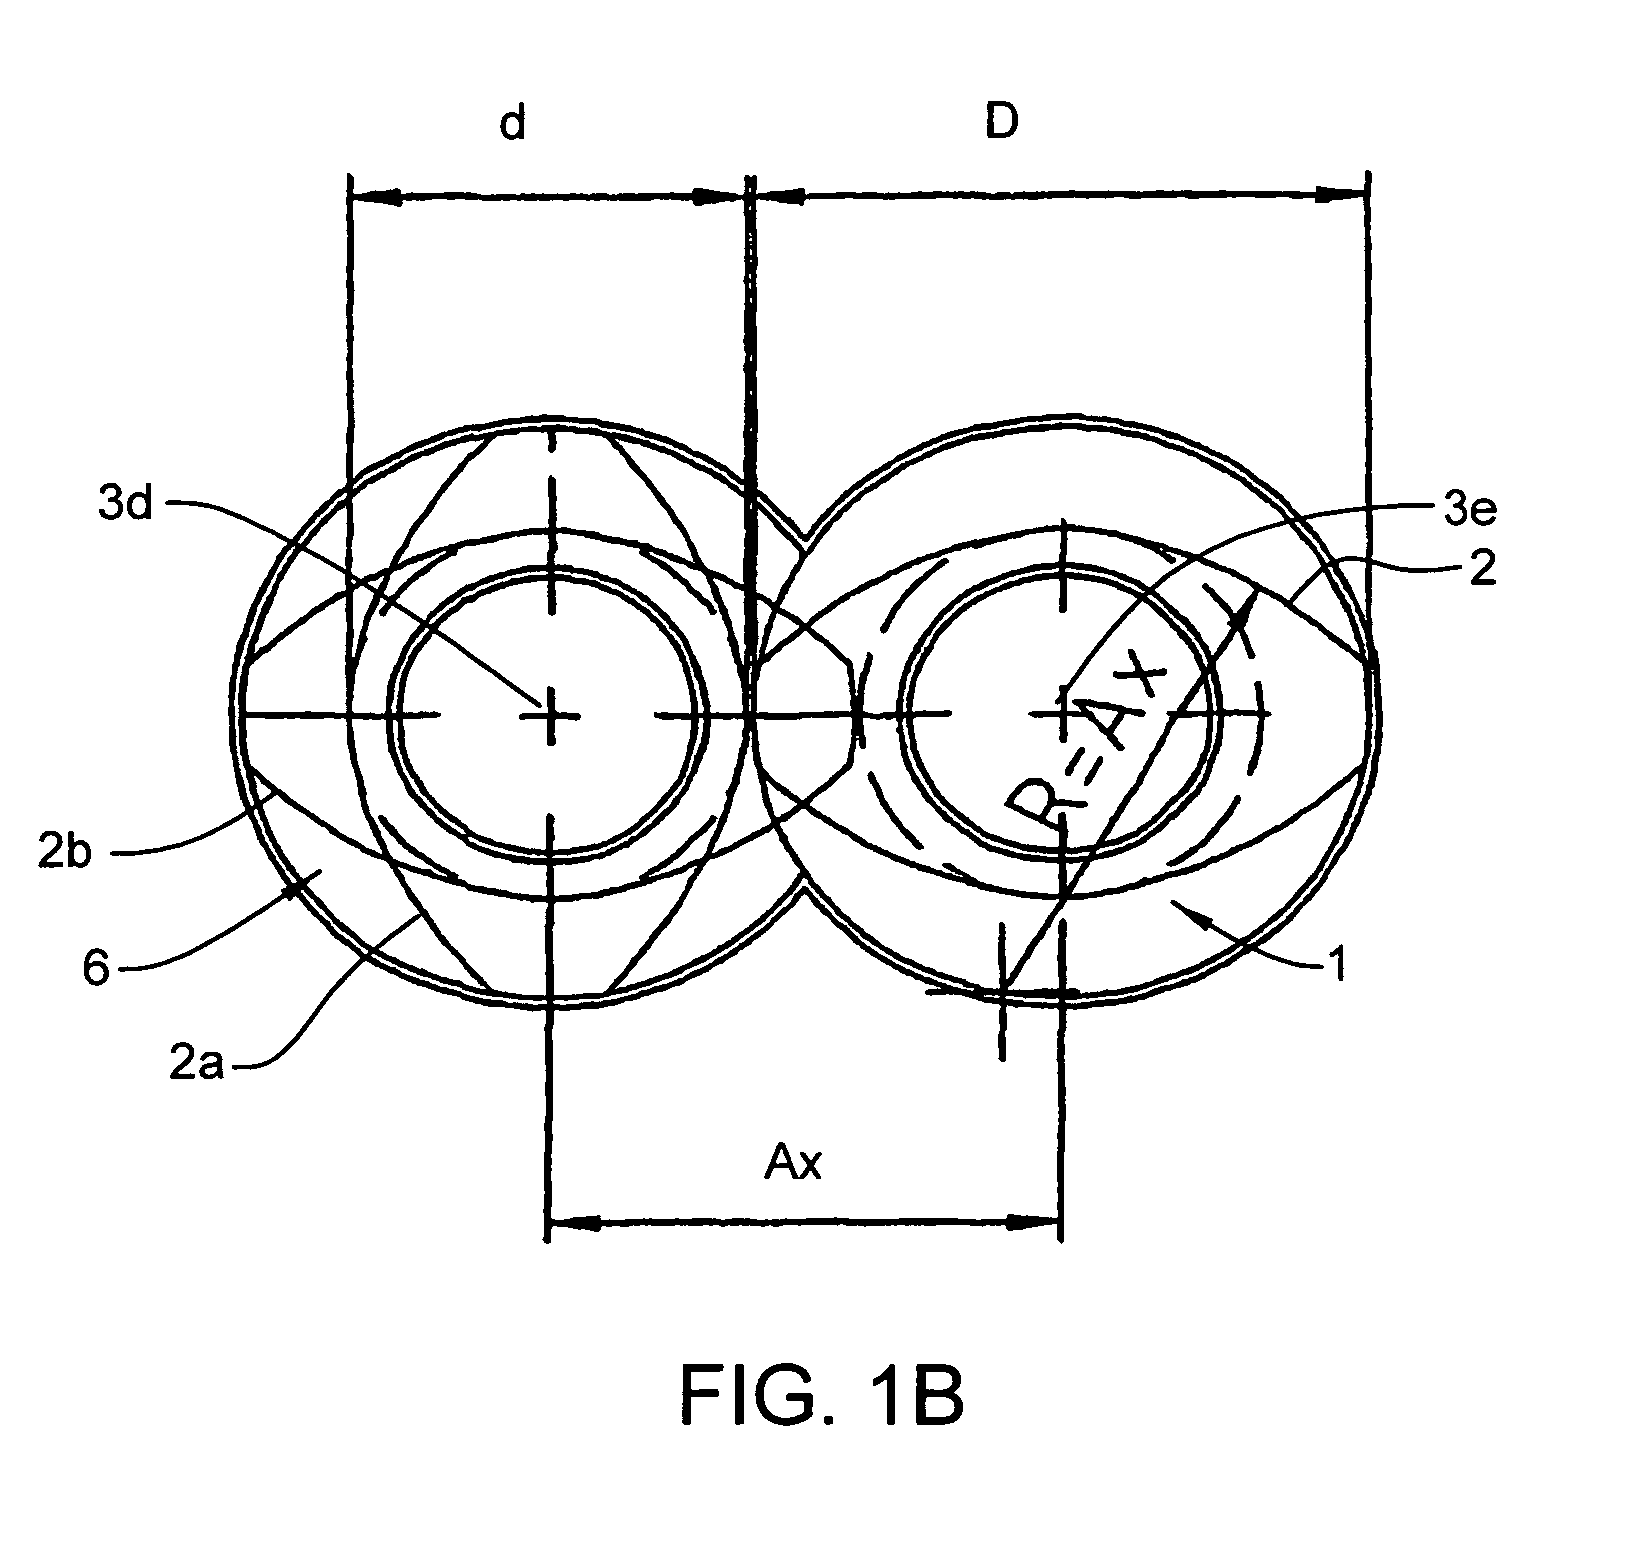 Extruder for continuously working and/or processing flowable materials